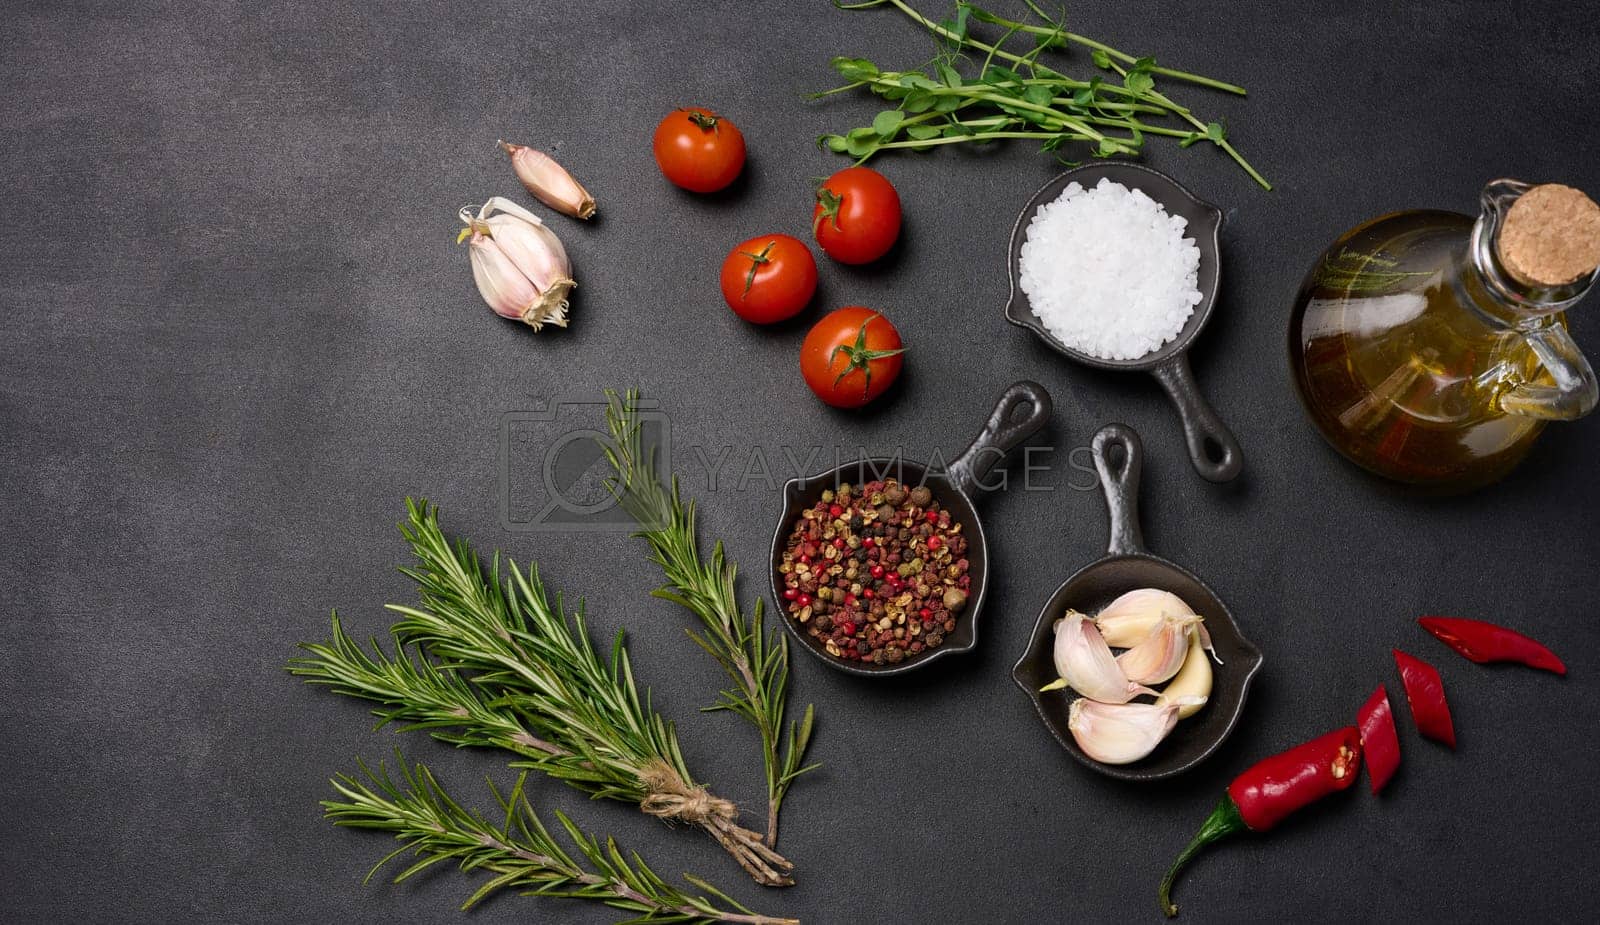 Royalty free image of Miniature pans with spices, salt, black pepper and fragrant pepper, a sprig of rosemary on a black table. Spices for cooking by ndanko